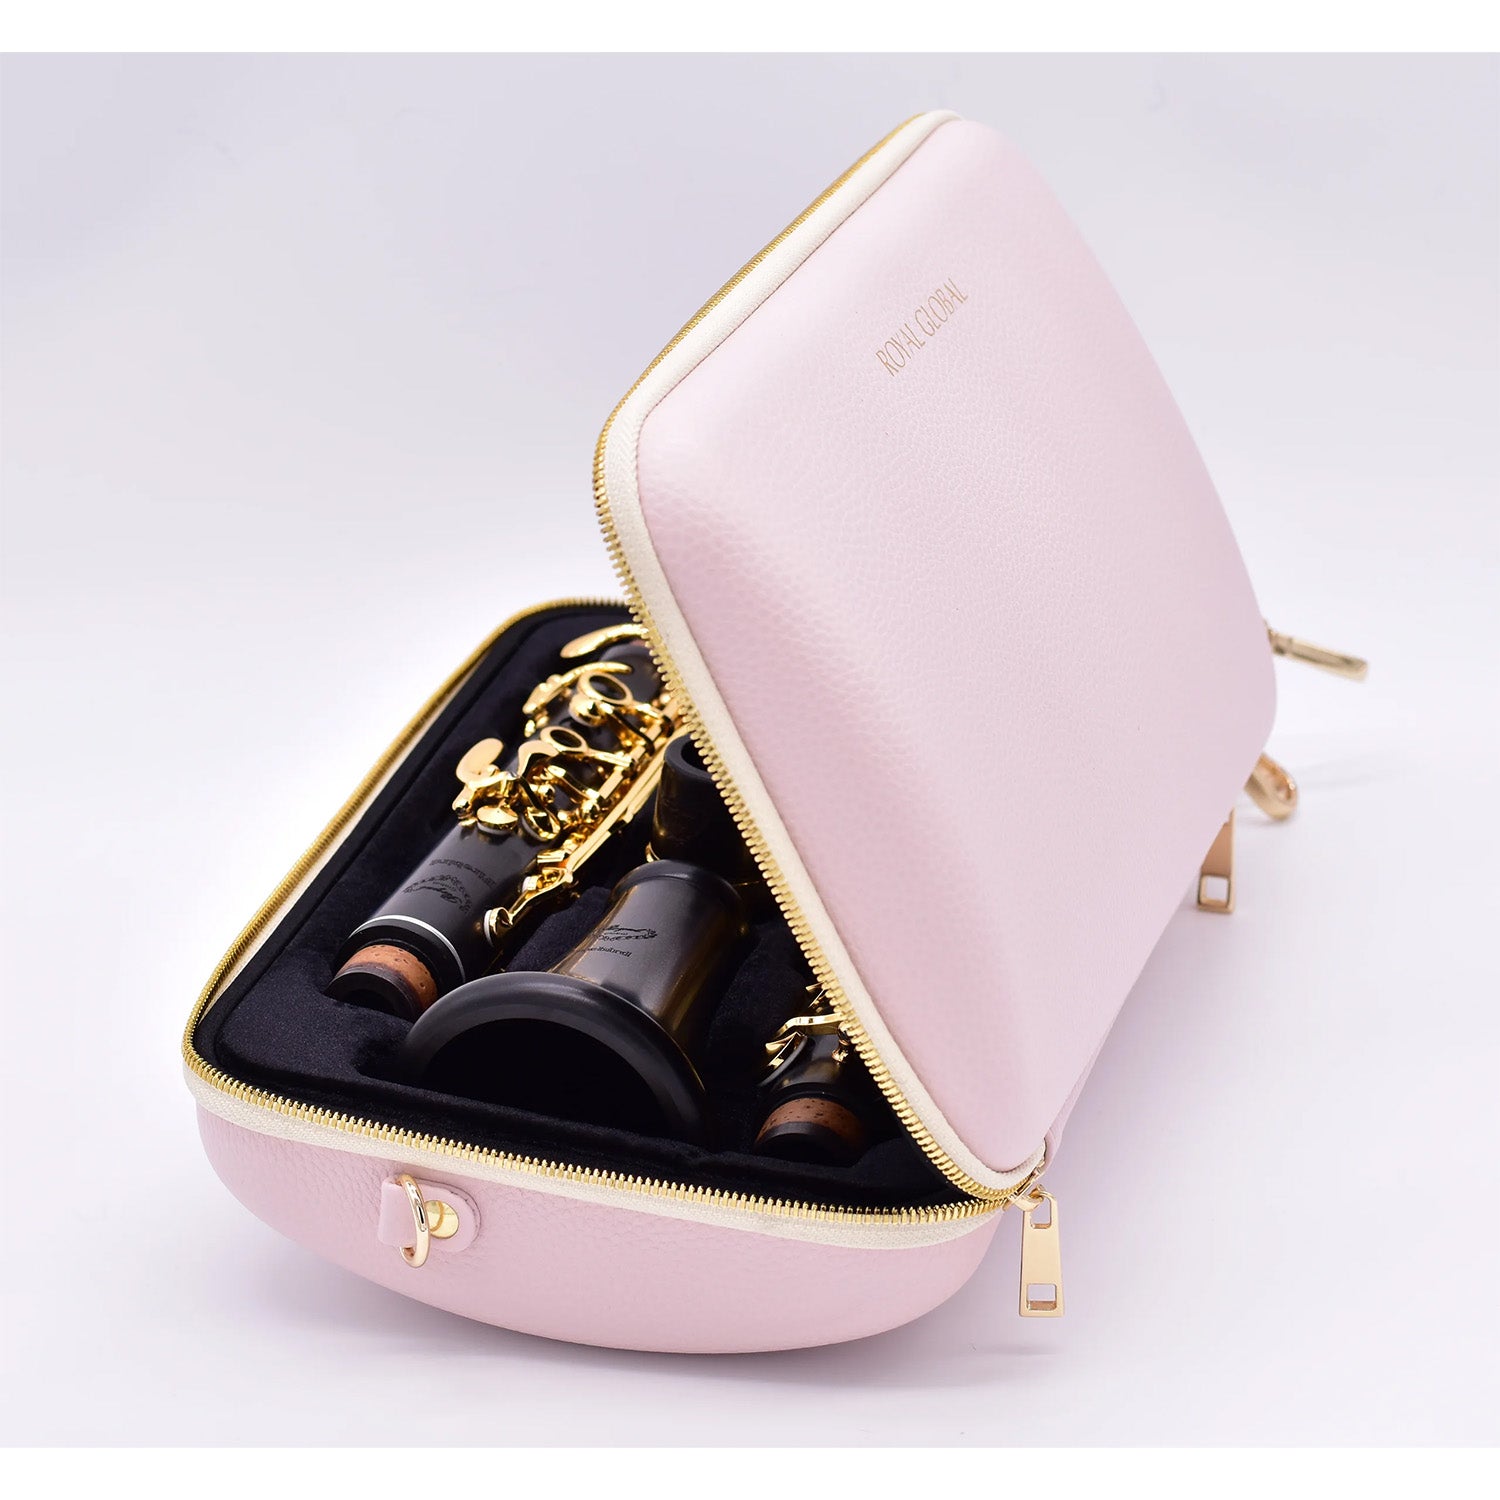 Pink Royal Global single clarinet case, side view, open to show gold-plated Royal Global Firebird clarinet resting inside, on a light gray background